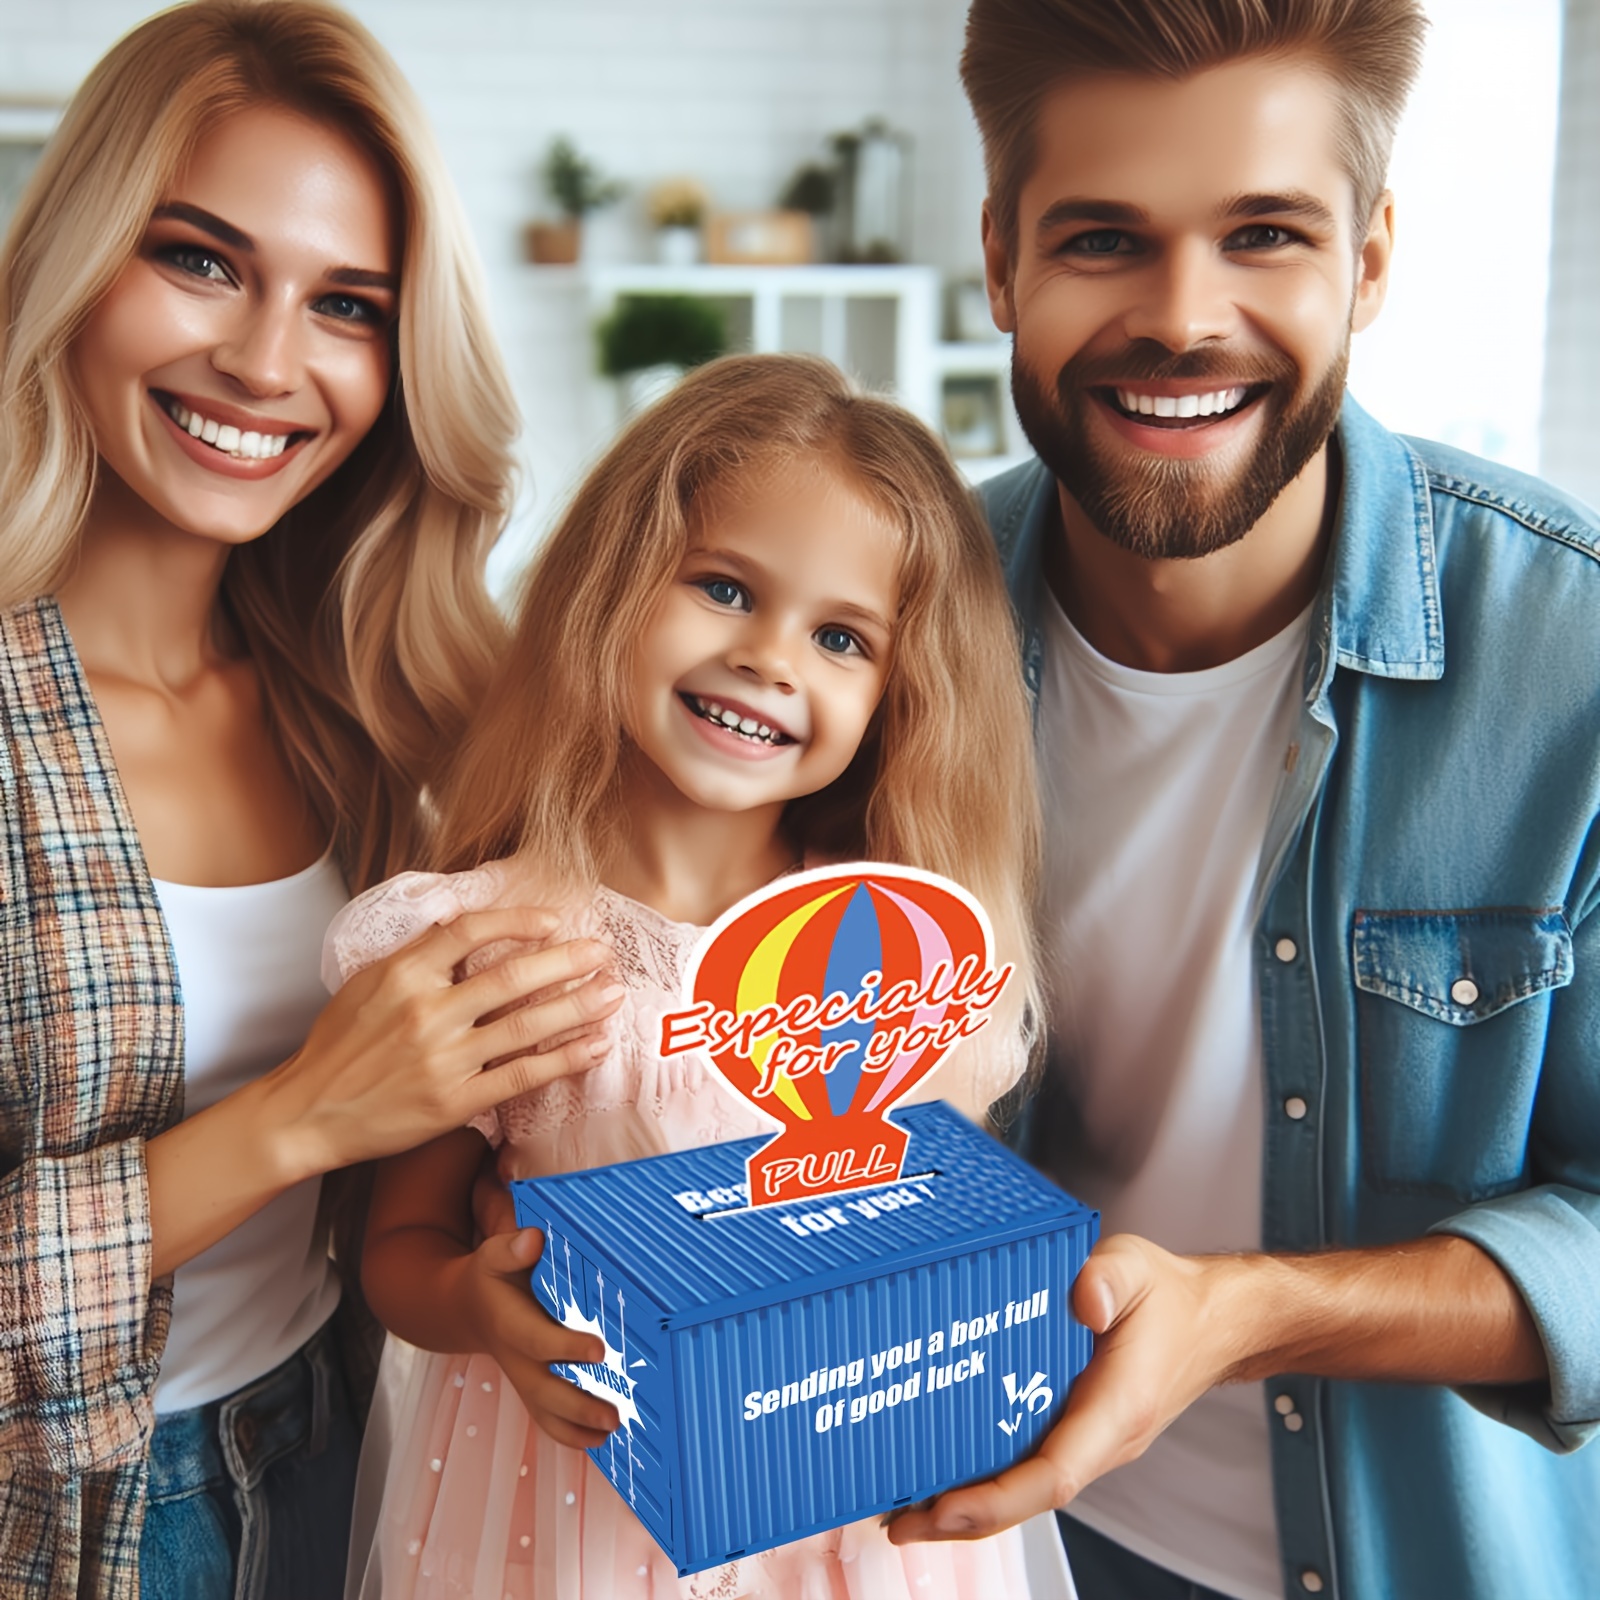 A Box Filled With Surprises And A Flying Butterfly, Perfect For Giving Money As A Gift. The Box Is Designed To Pop Open And Reveal A Hot Air Balloon Card, Making It A Fun And Unique Way To Give Cash As A Birthday Present For Both Kids And Adults.